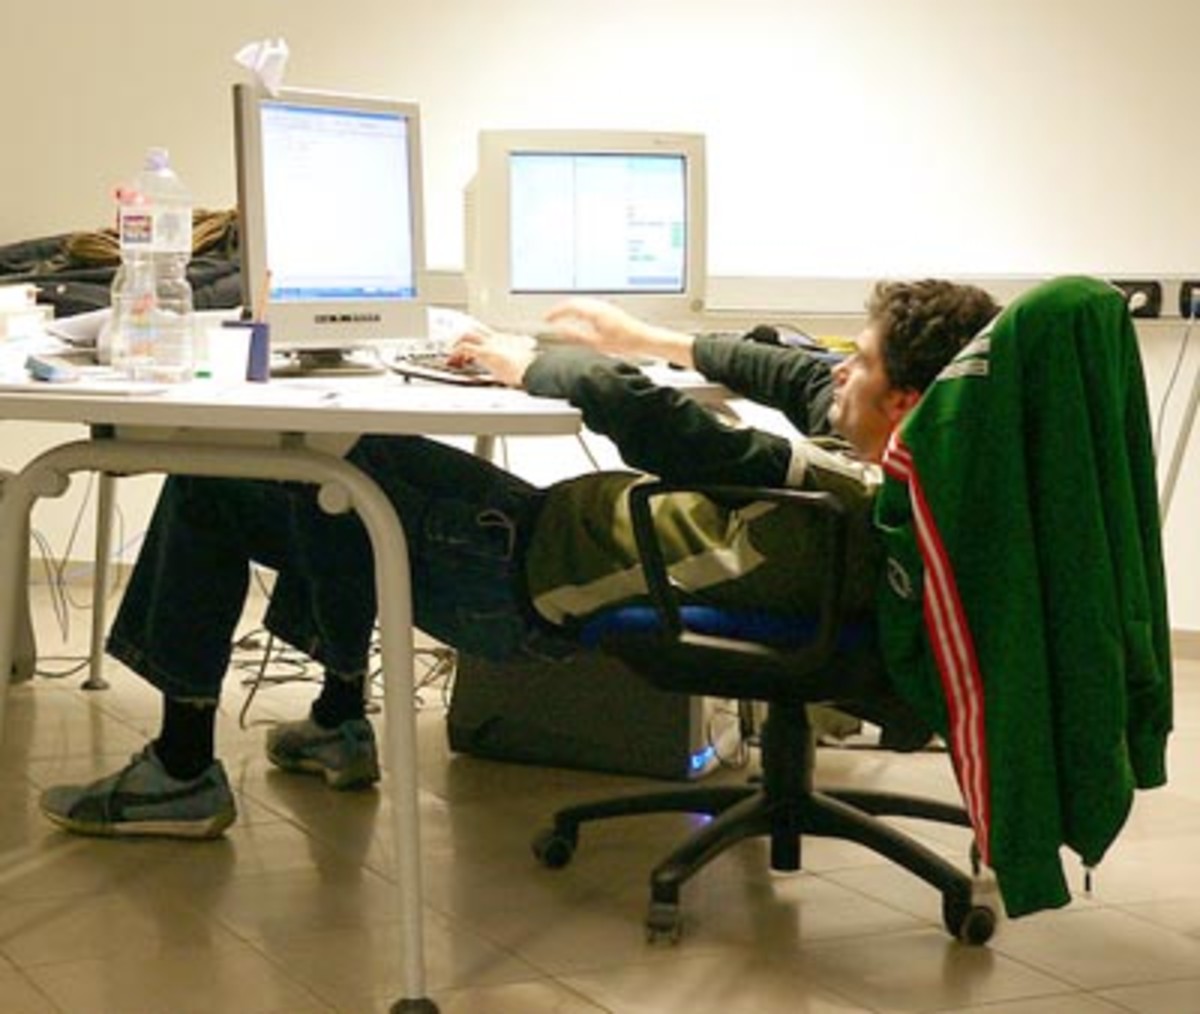 Use of ergonomics to improve condition of employees at workplace.